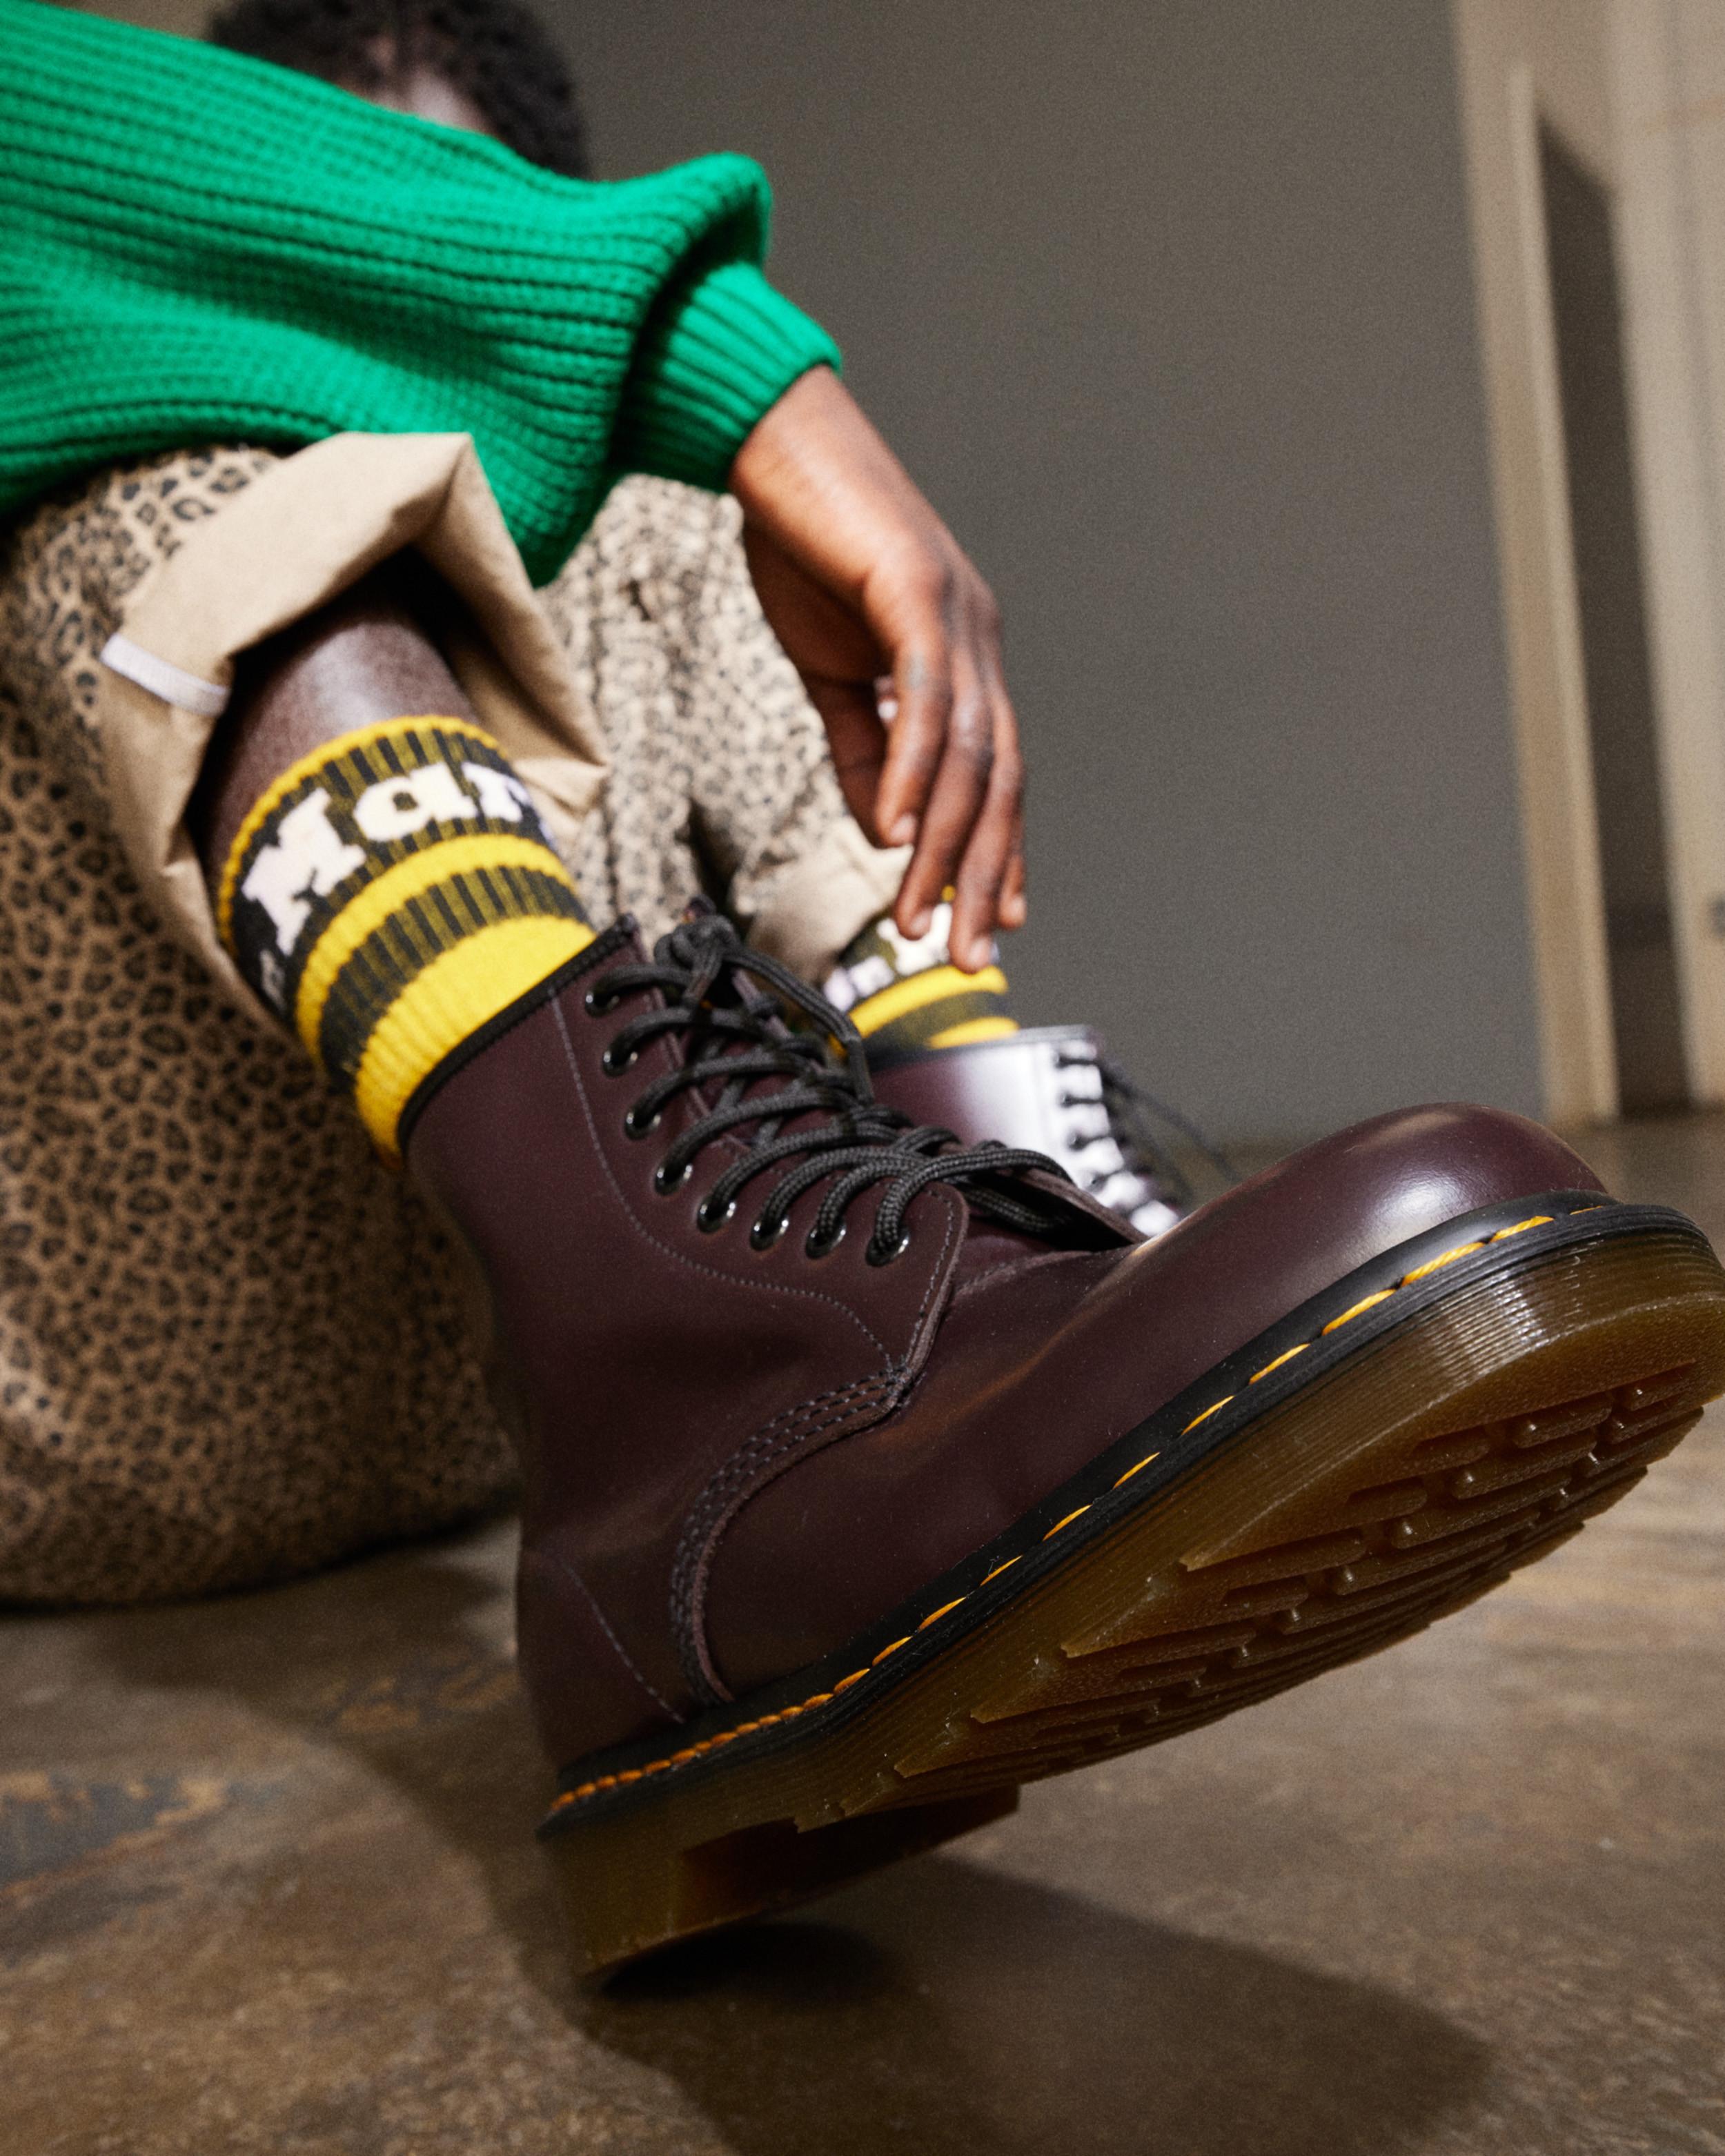 1460 Burgundy Smooth Leather Lace Up Boots1460 Smooth Leather Lace Up Boots Dr. Martens